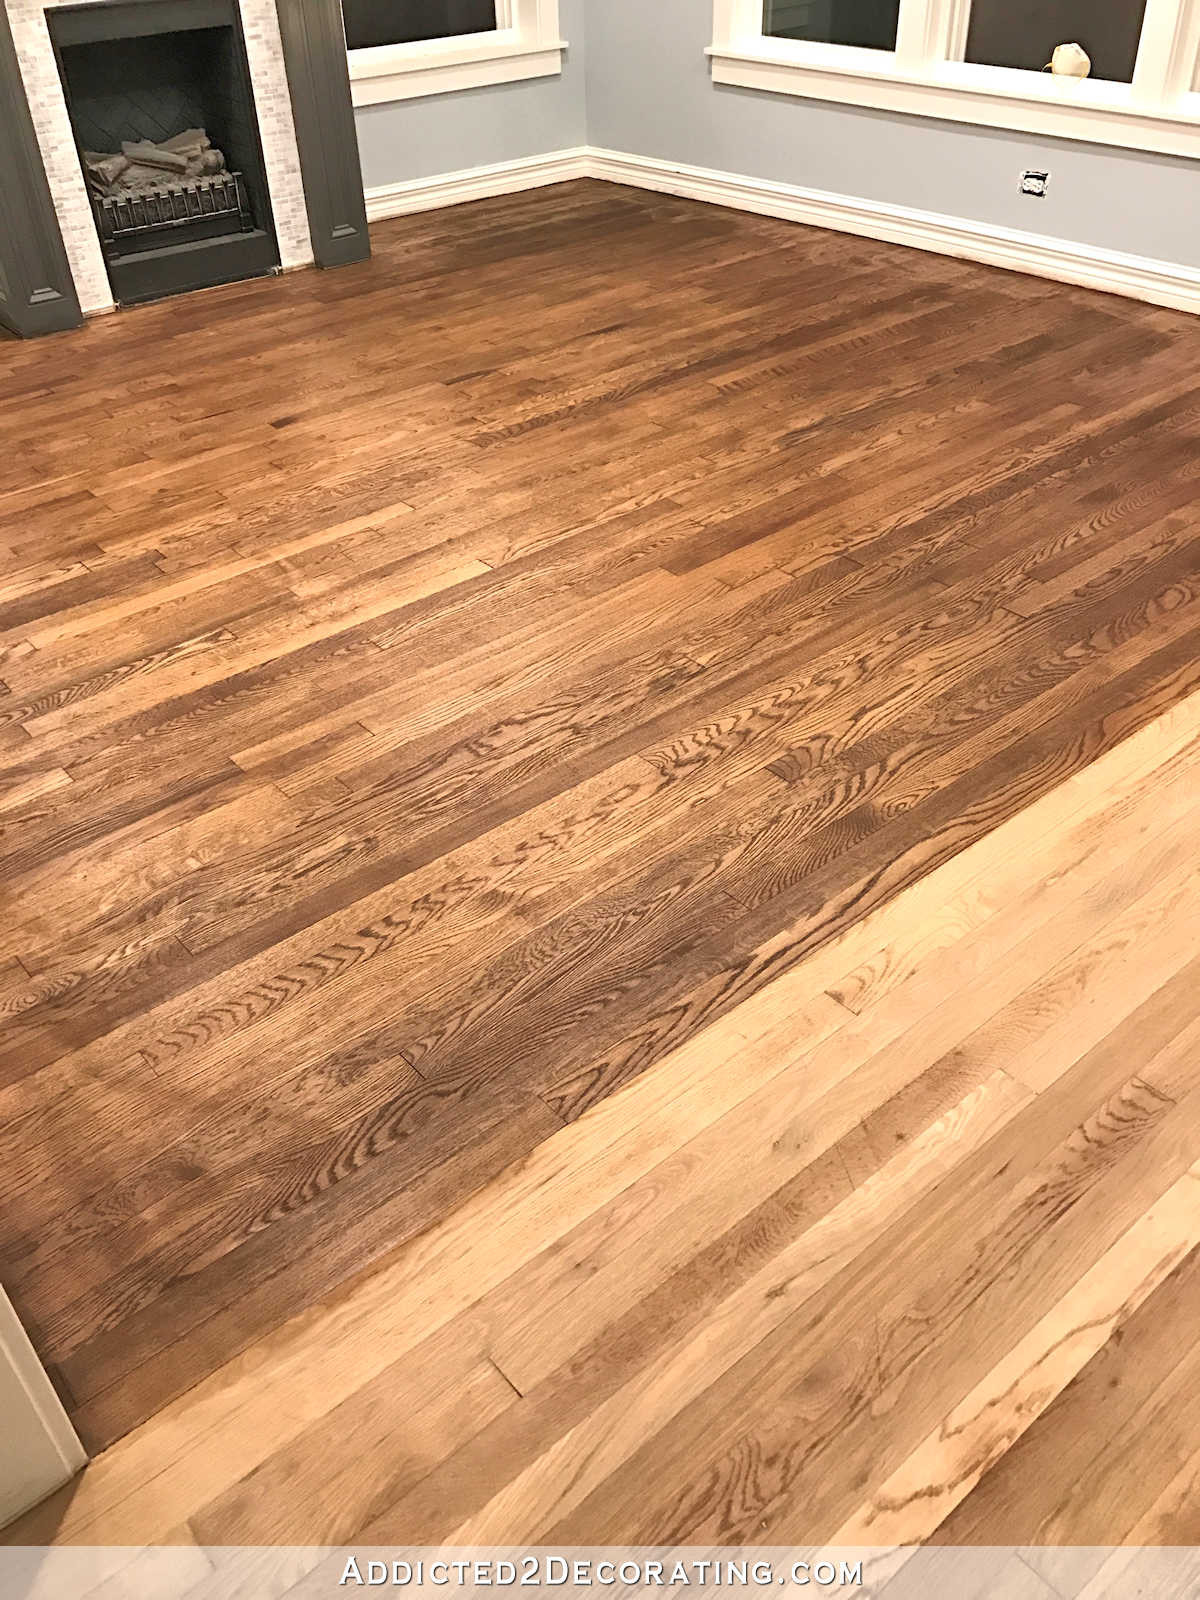 19 Recommended How to Refinish Hardwood Floors Video 2024 free download how to refinish hardwood floors video of adventures in staining my red oak hardwood floors products process regarding staining red oak hardwood floors 7 stain on the living room floor